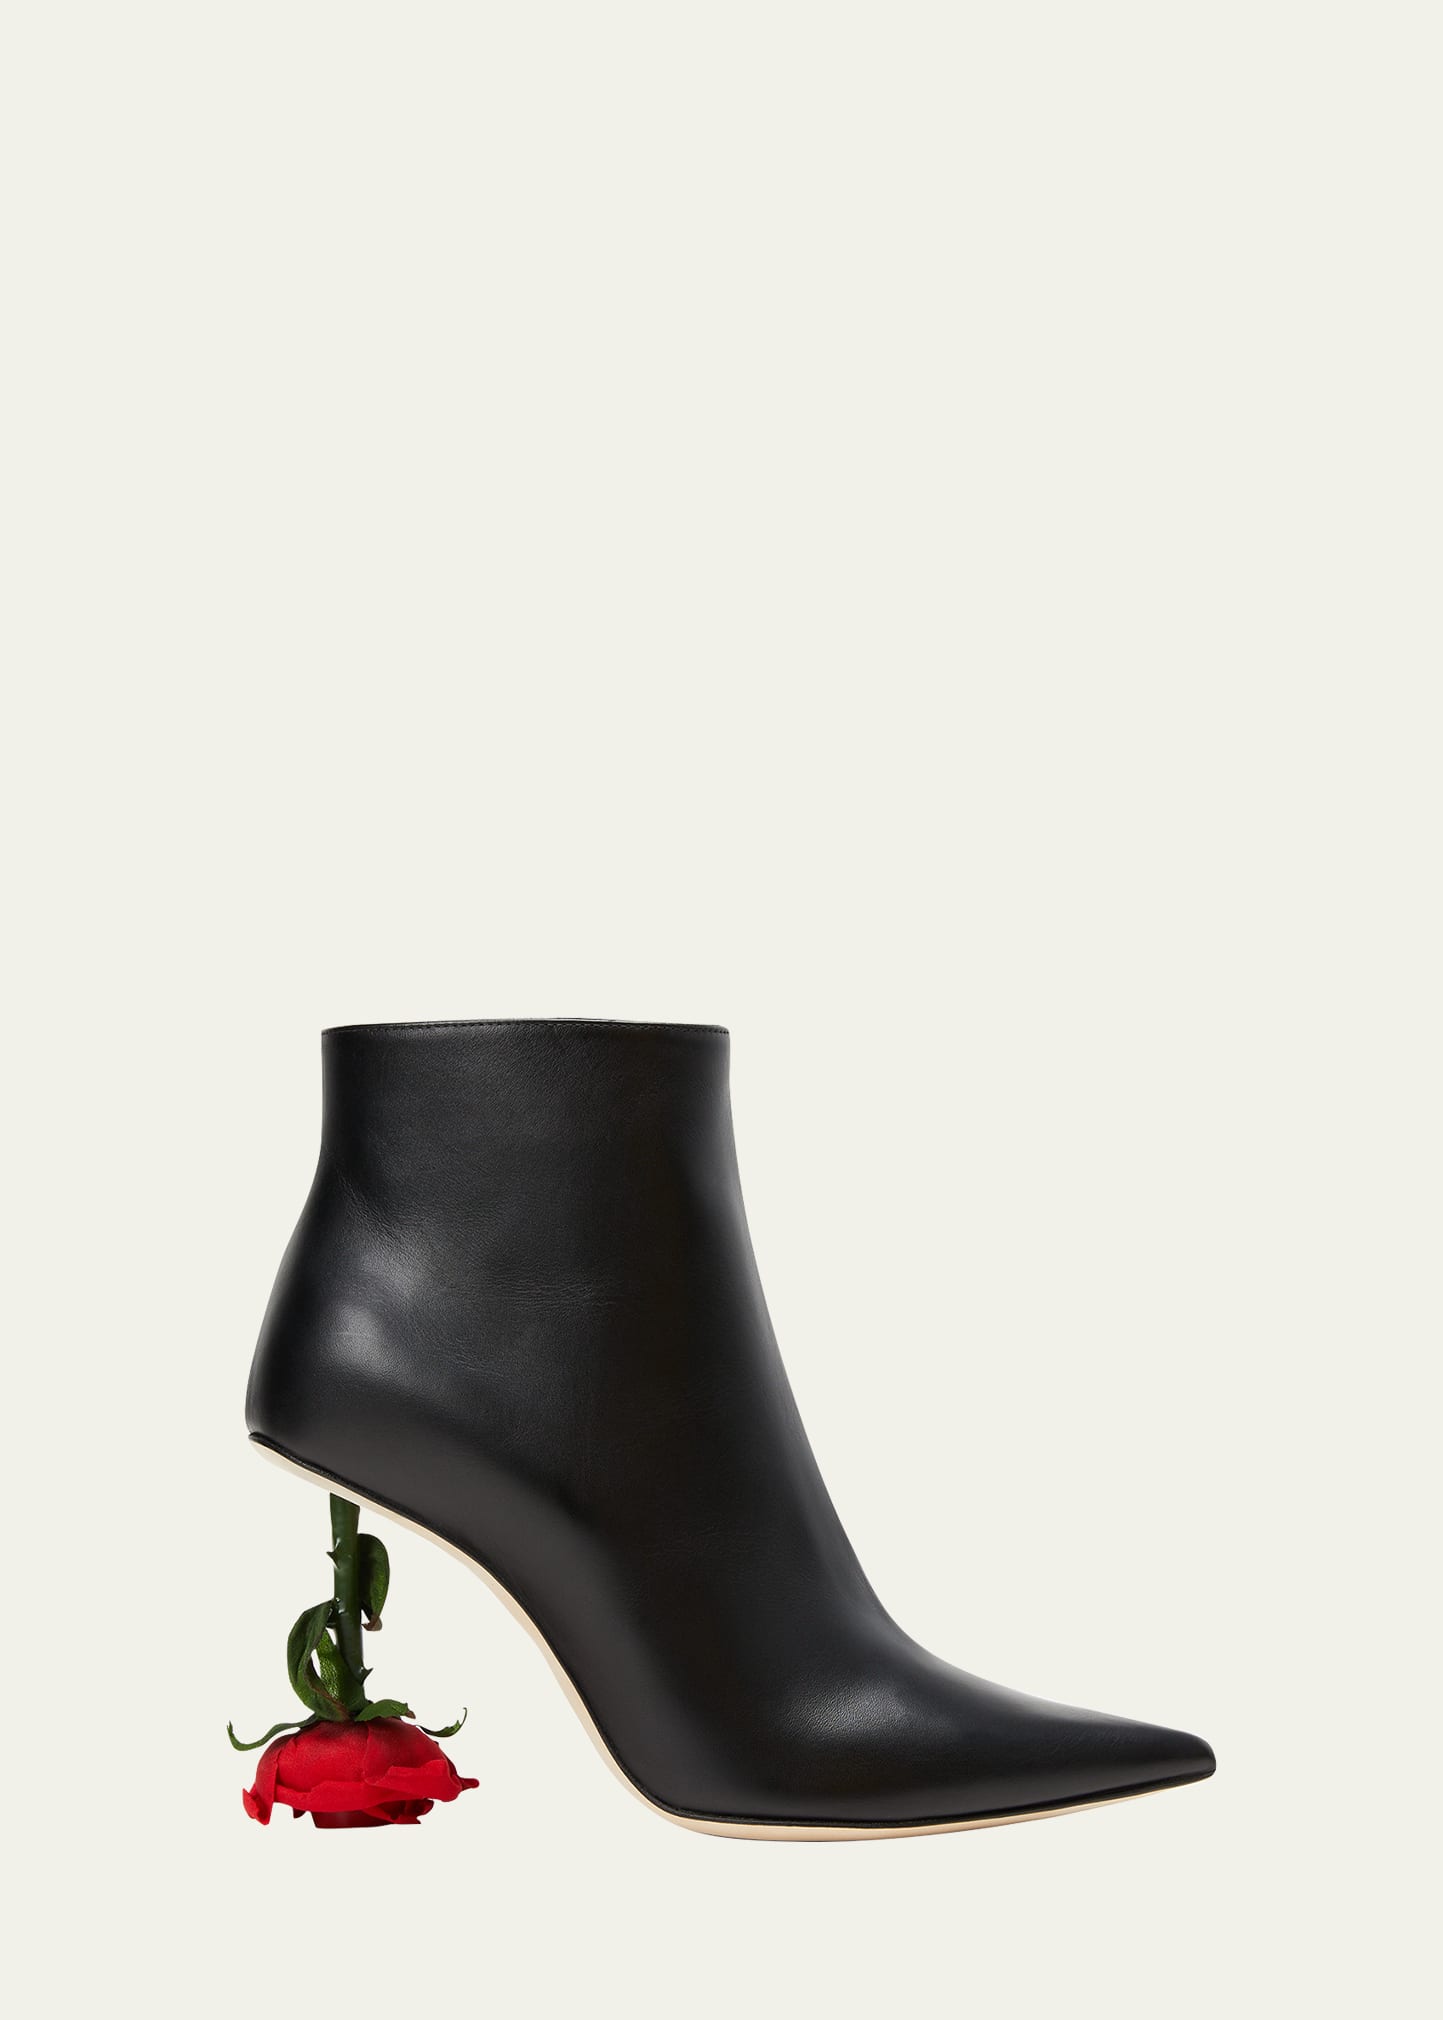 LOEWE LEATHER ROSE-HEEL ANKLE BOOTS